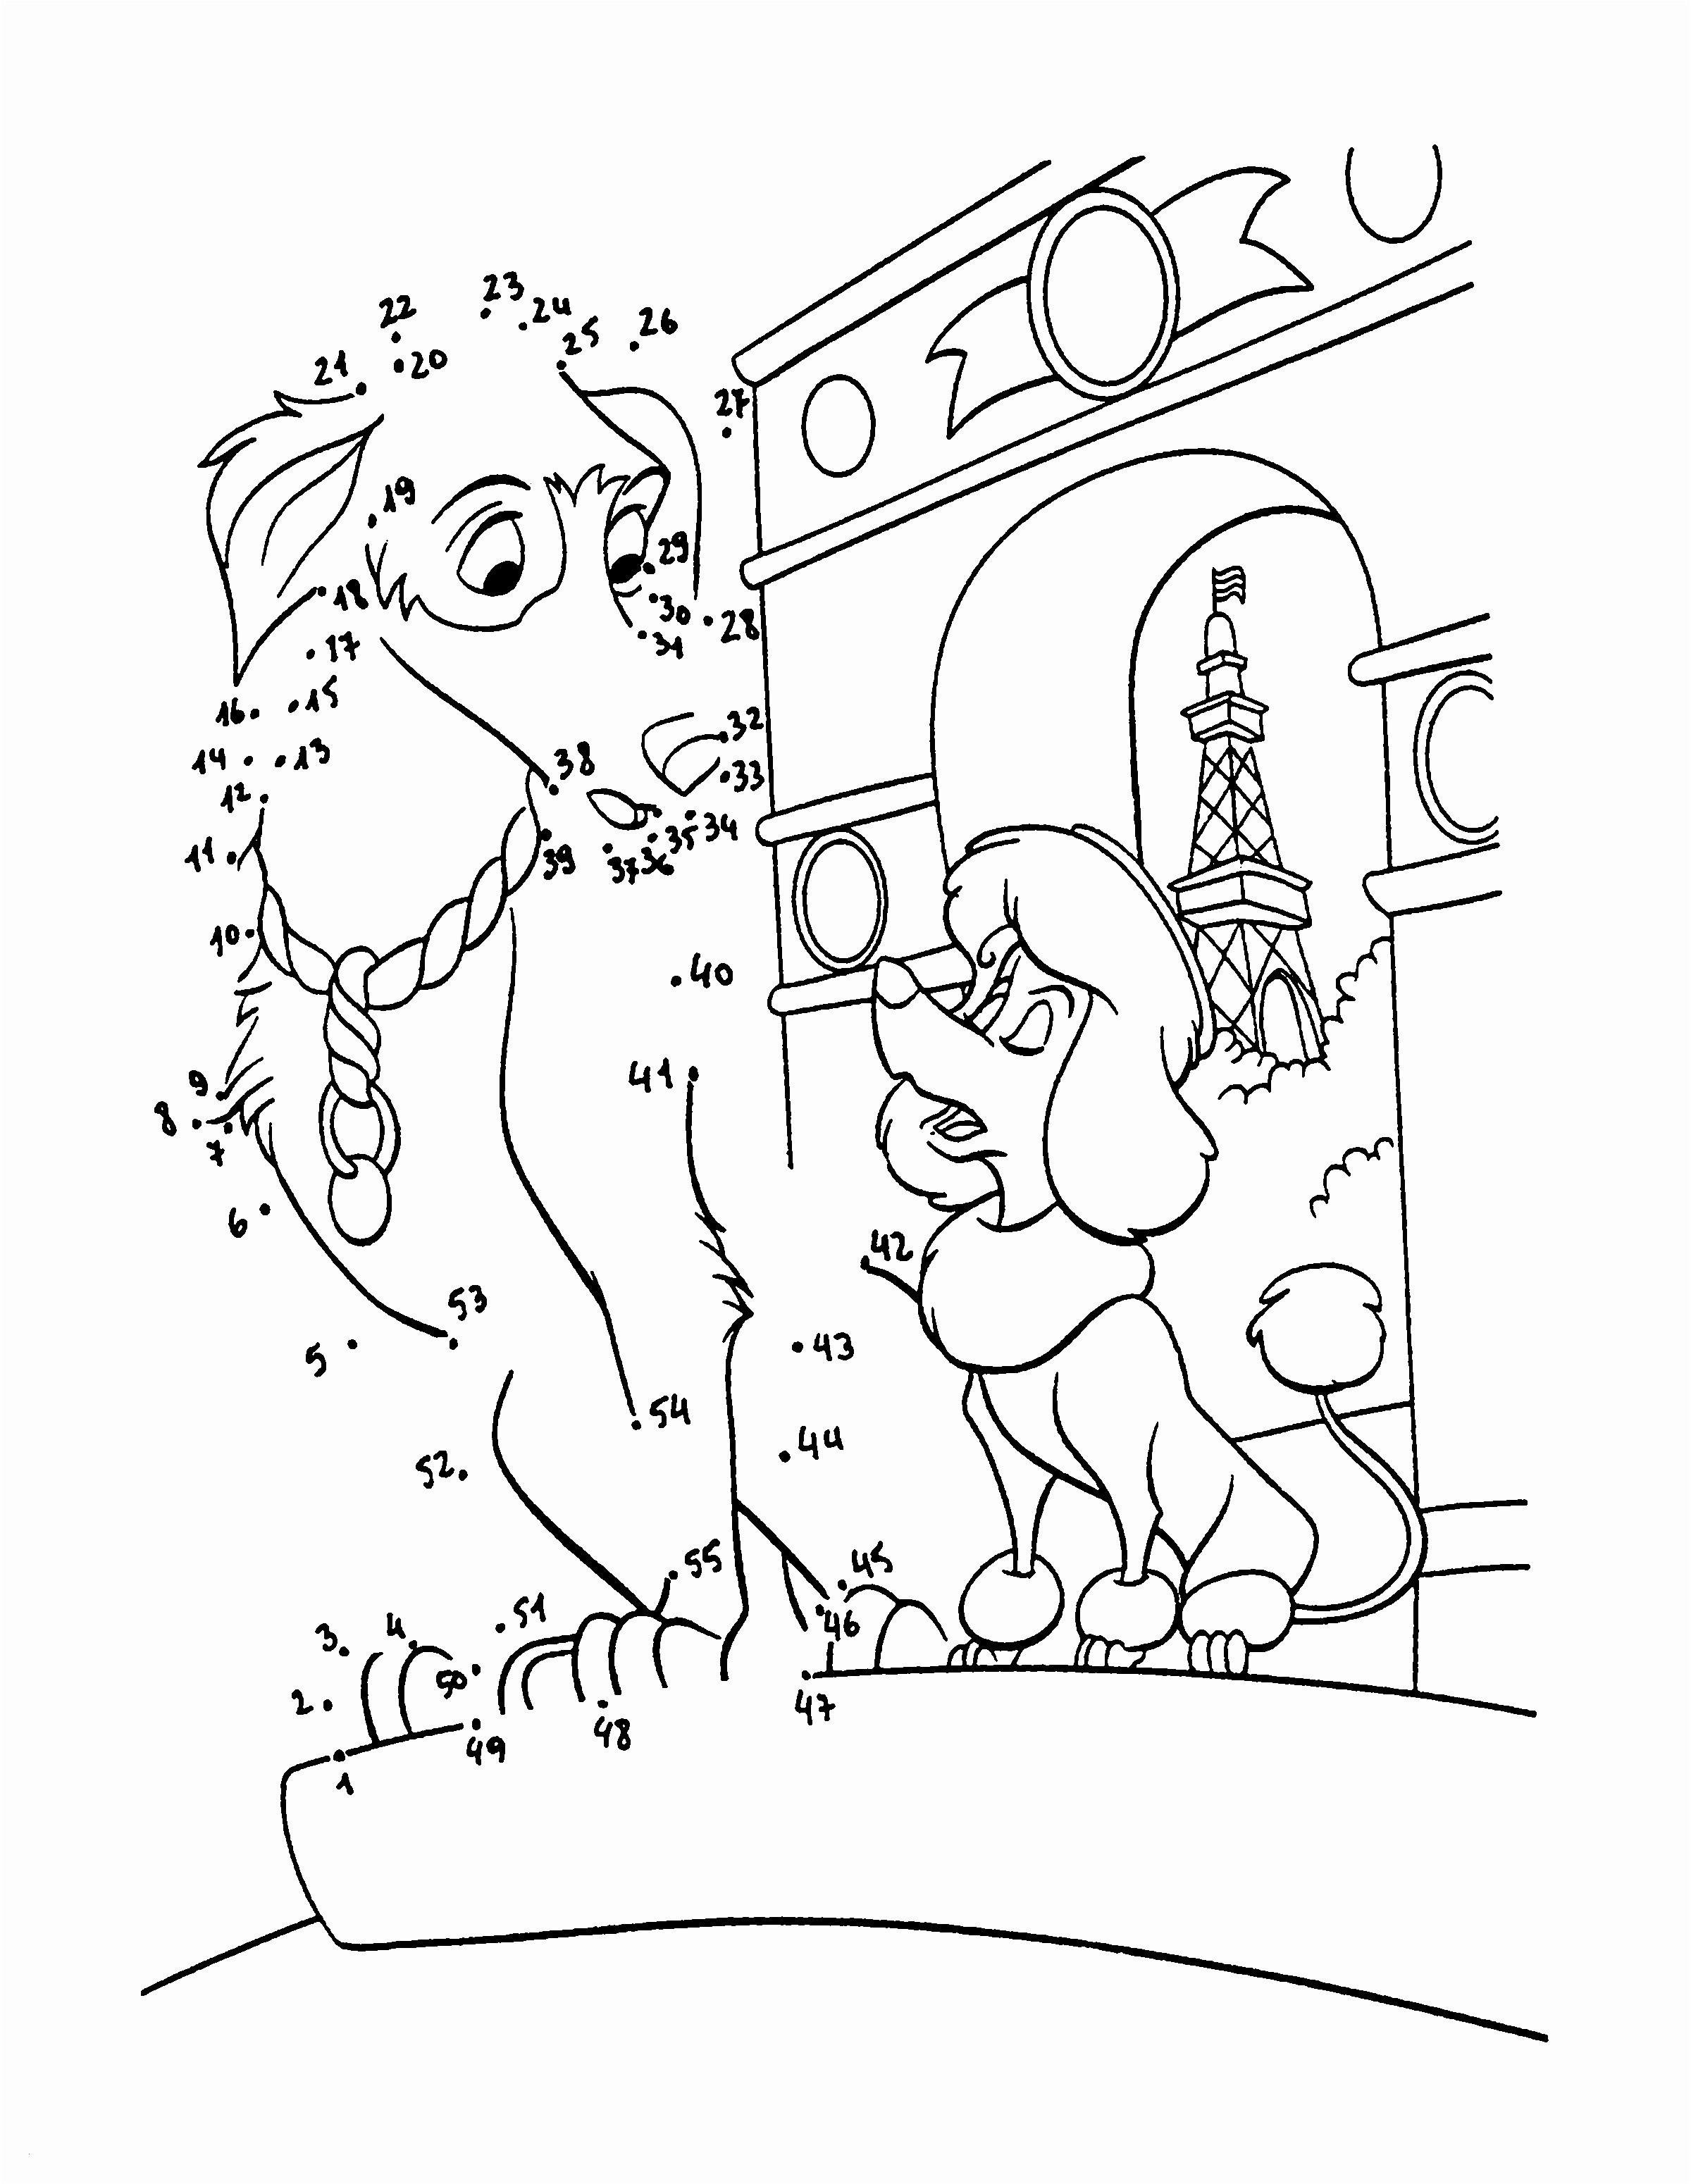 30 Lovable Teddy Bear Vase 2024 free download teddy bear vase of teddy bear coloring pages for adults simple adult coloring pages inside teddy bear coloring pages for adults teddy bear coloring pages fresh skateboard coloring page